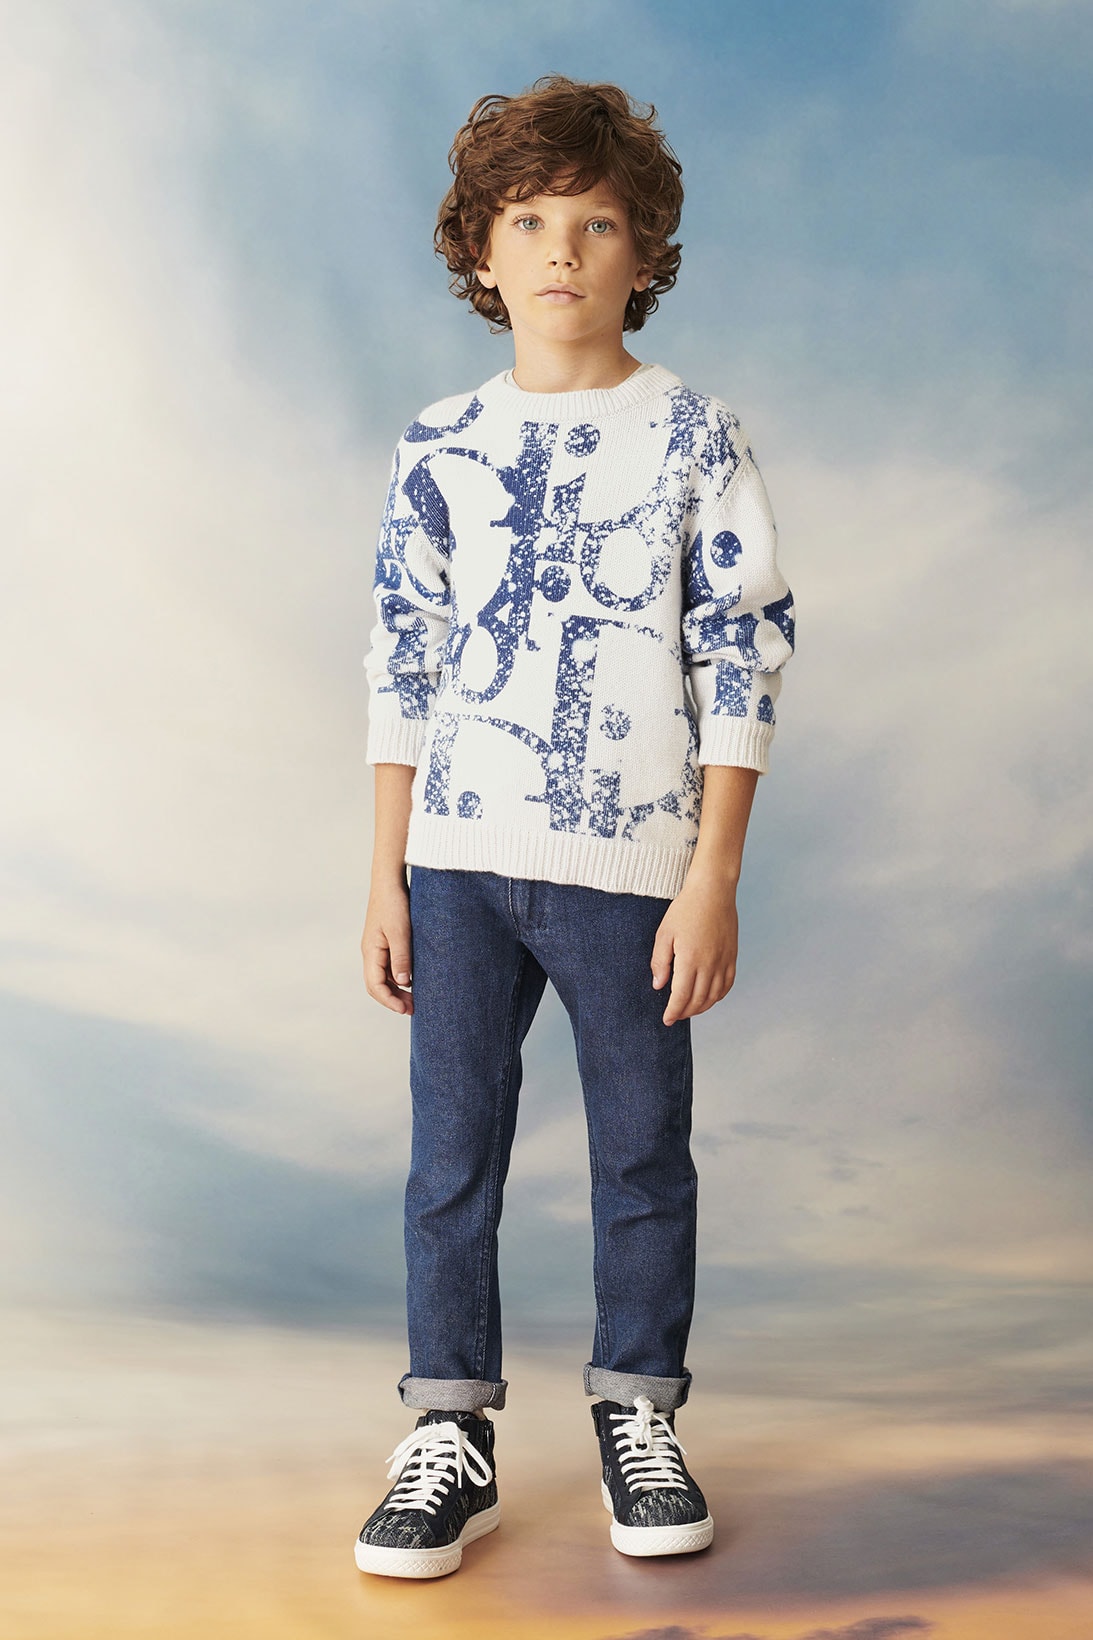 dior spring summer 2021 ss21 kids collection boys sweater jeans